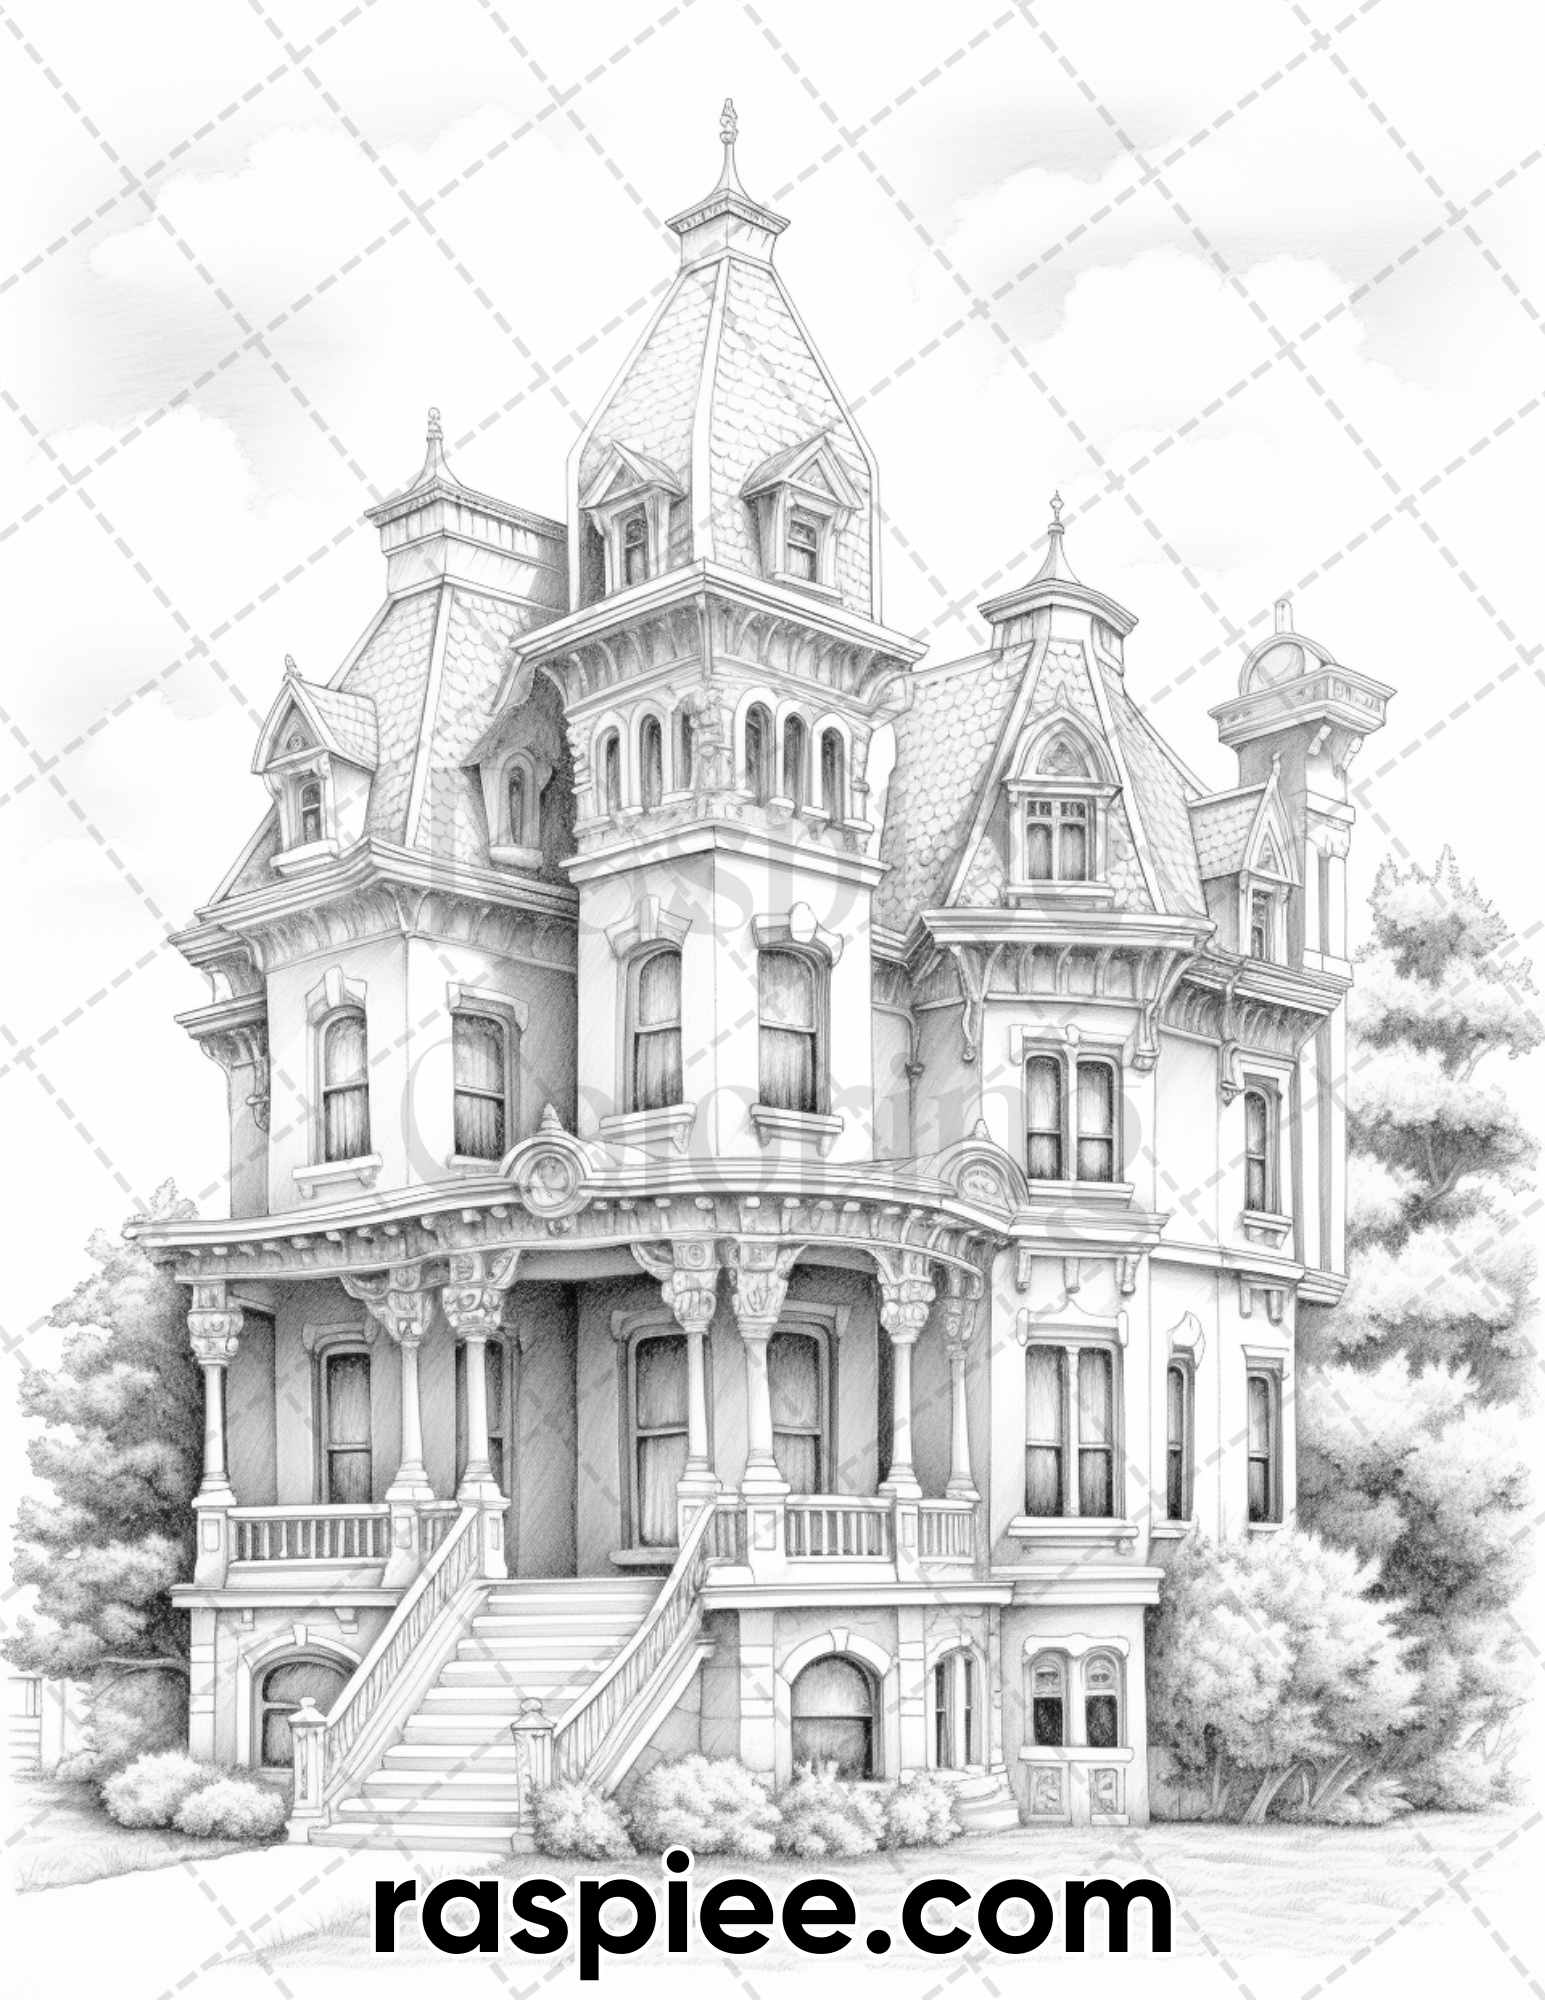 Grayscale Coloring Pages, Victorian Mansions Coloring, Adult Coloring Art, Victorian Coloring Pages, Intricate Designs for Coloring, Relaxing DIY Coloring, Architecture Coloring Pages, Stress Relief Coloring Pages, Instant Download Coloring